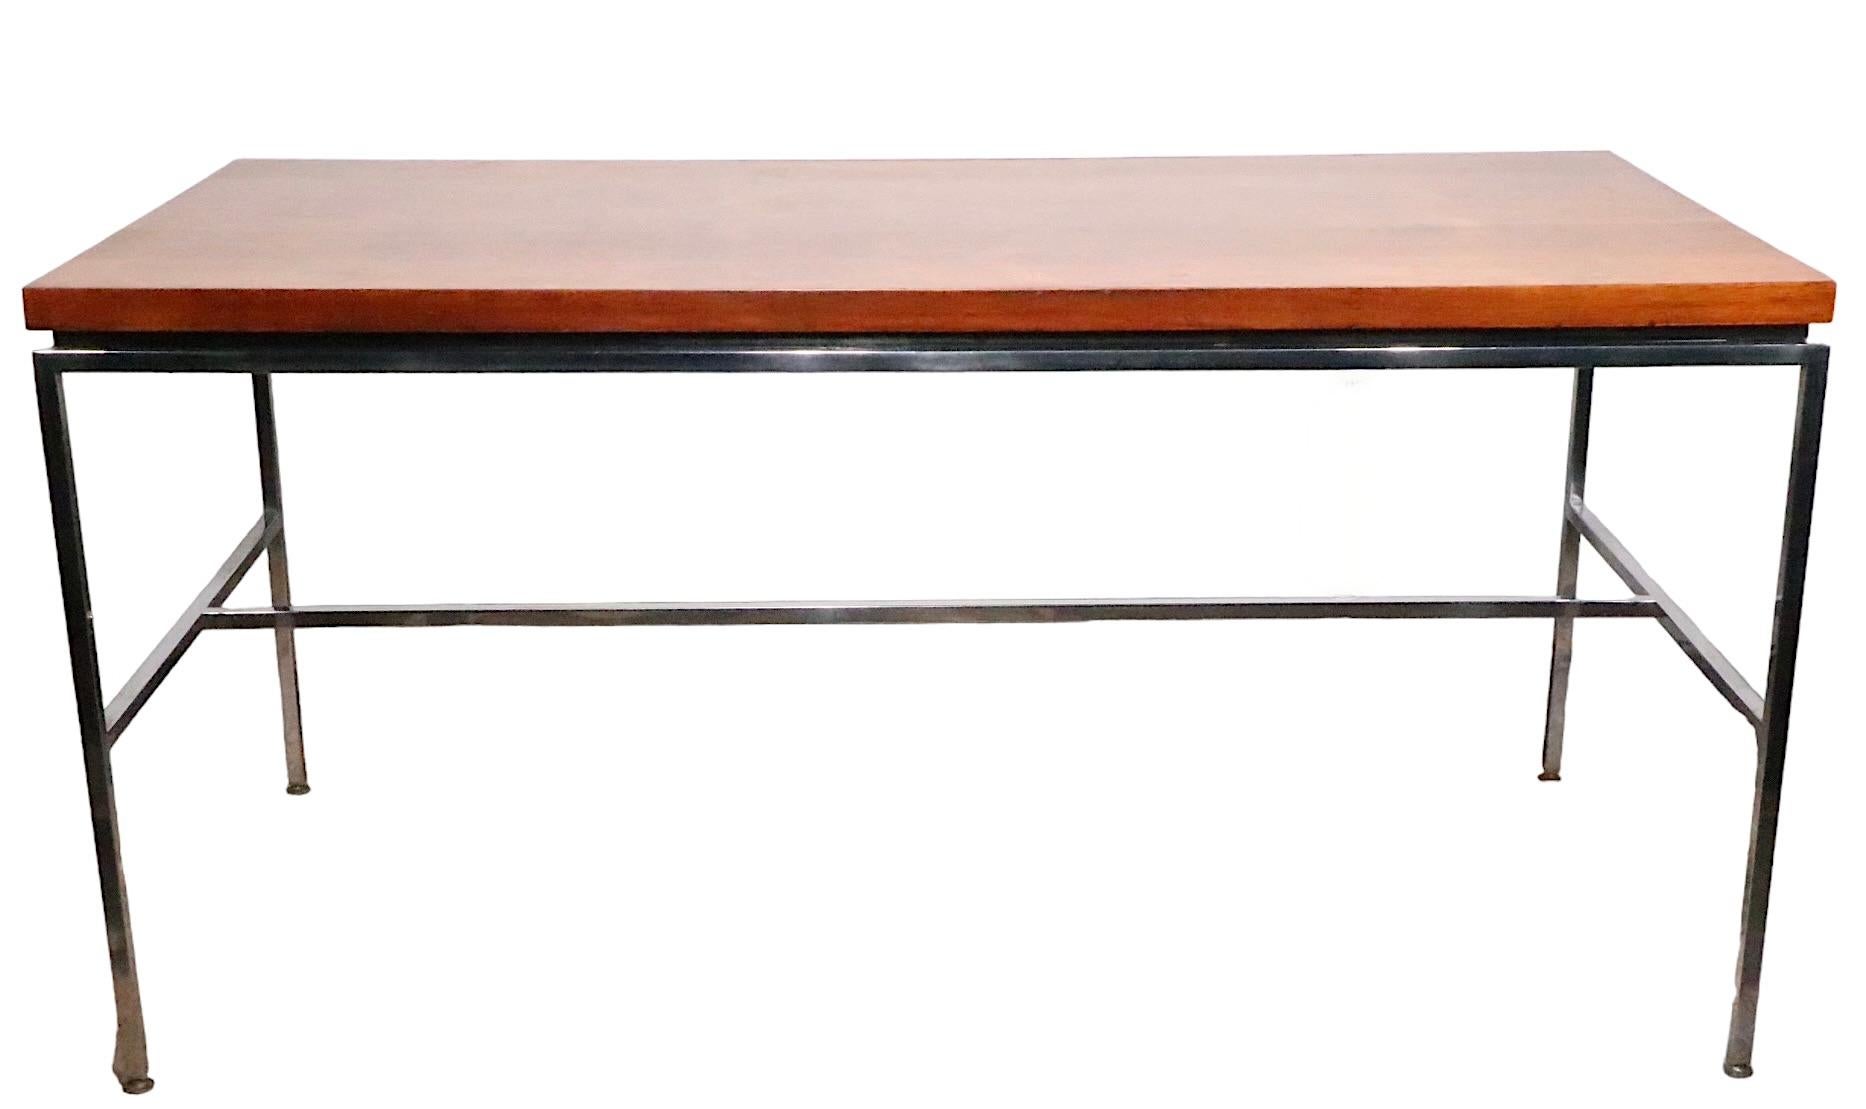 Rosewood and Chrome Drexel Index Writing Desk Library Table, circa 1970s For Sale 2